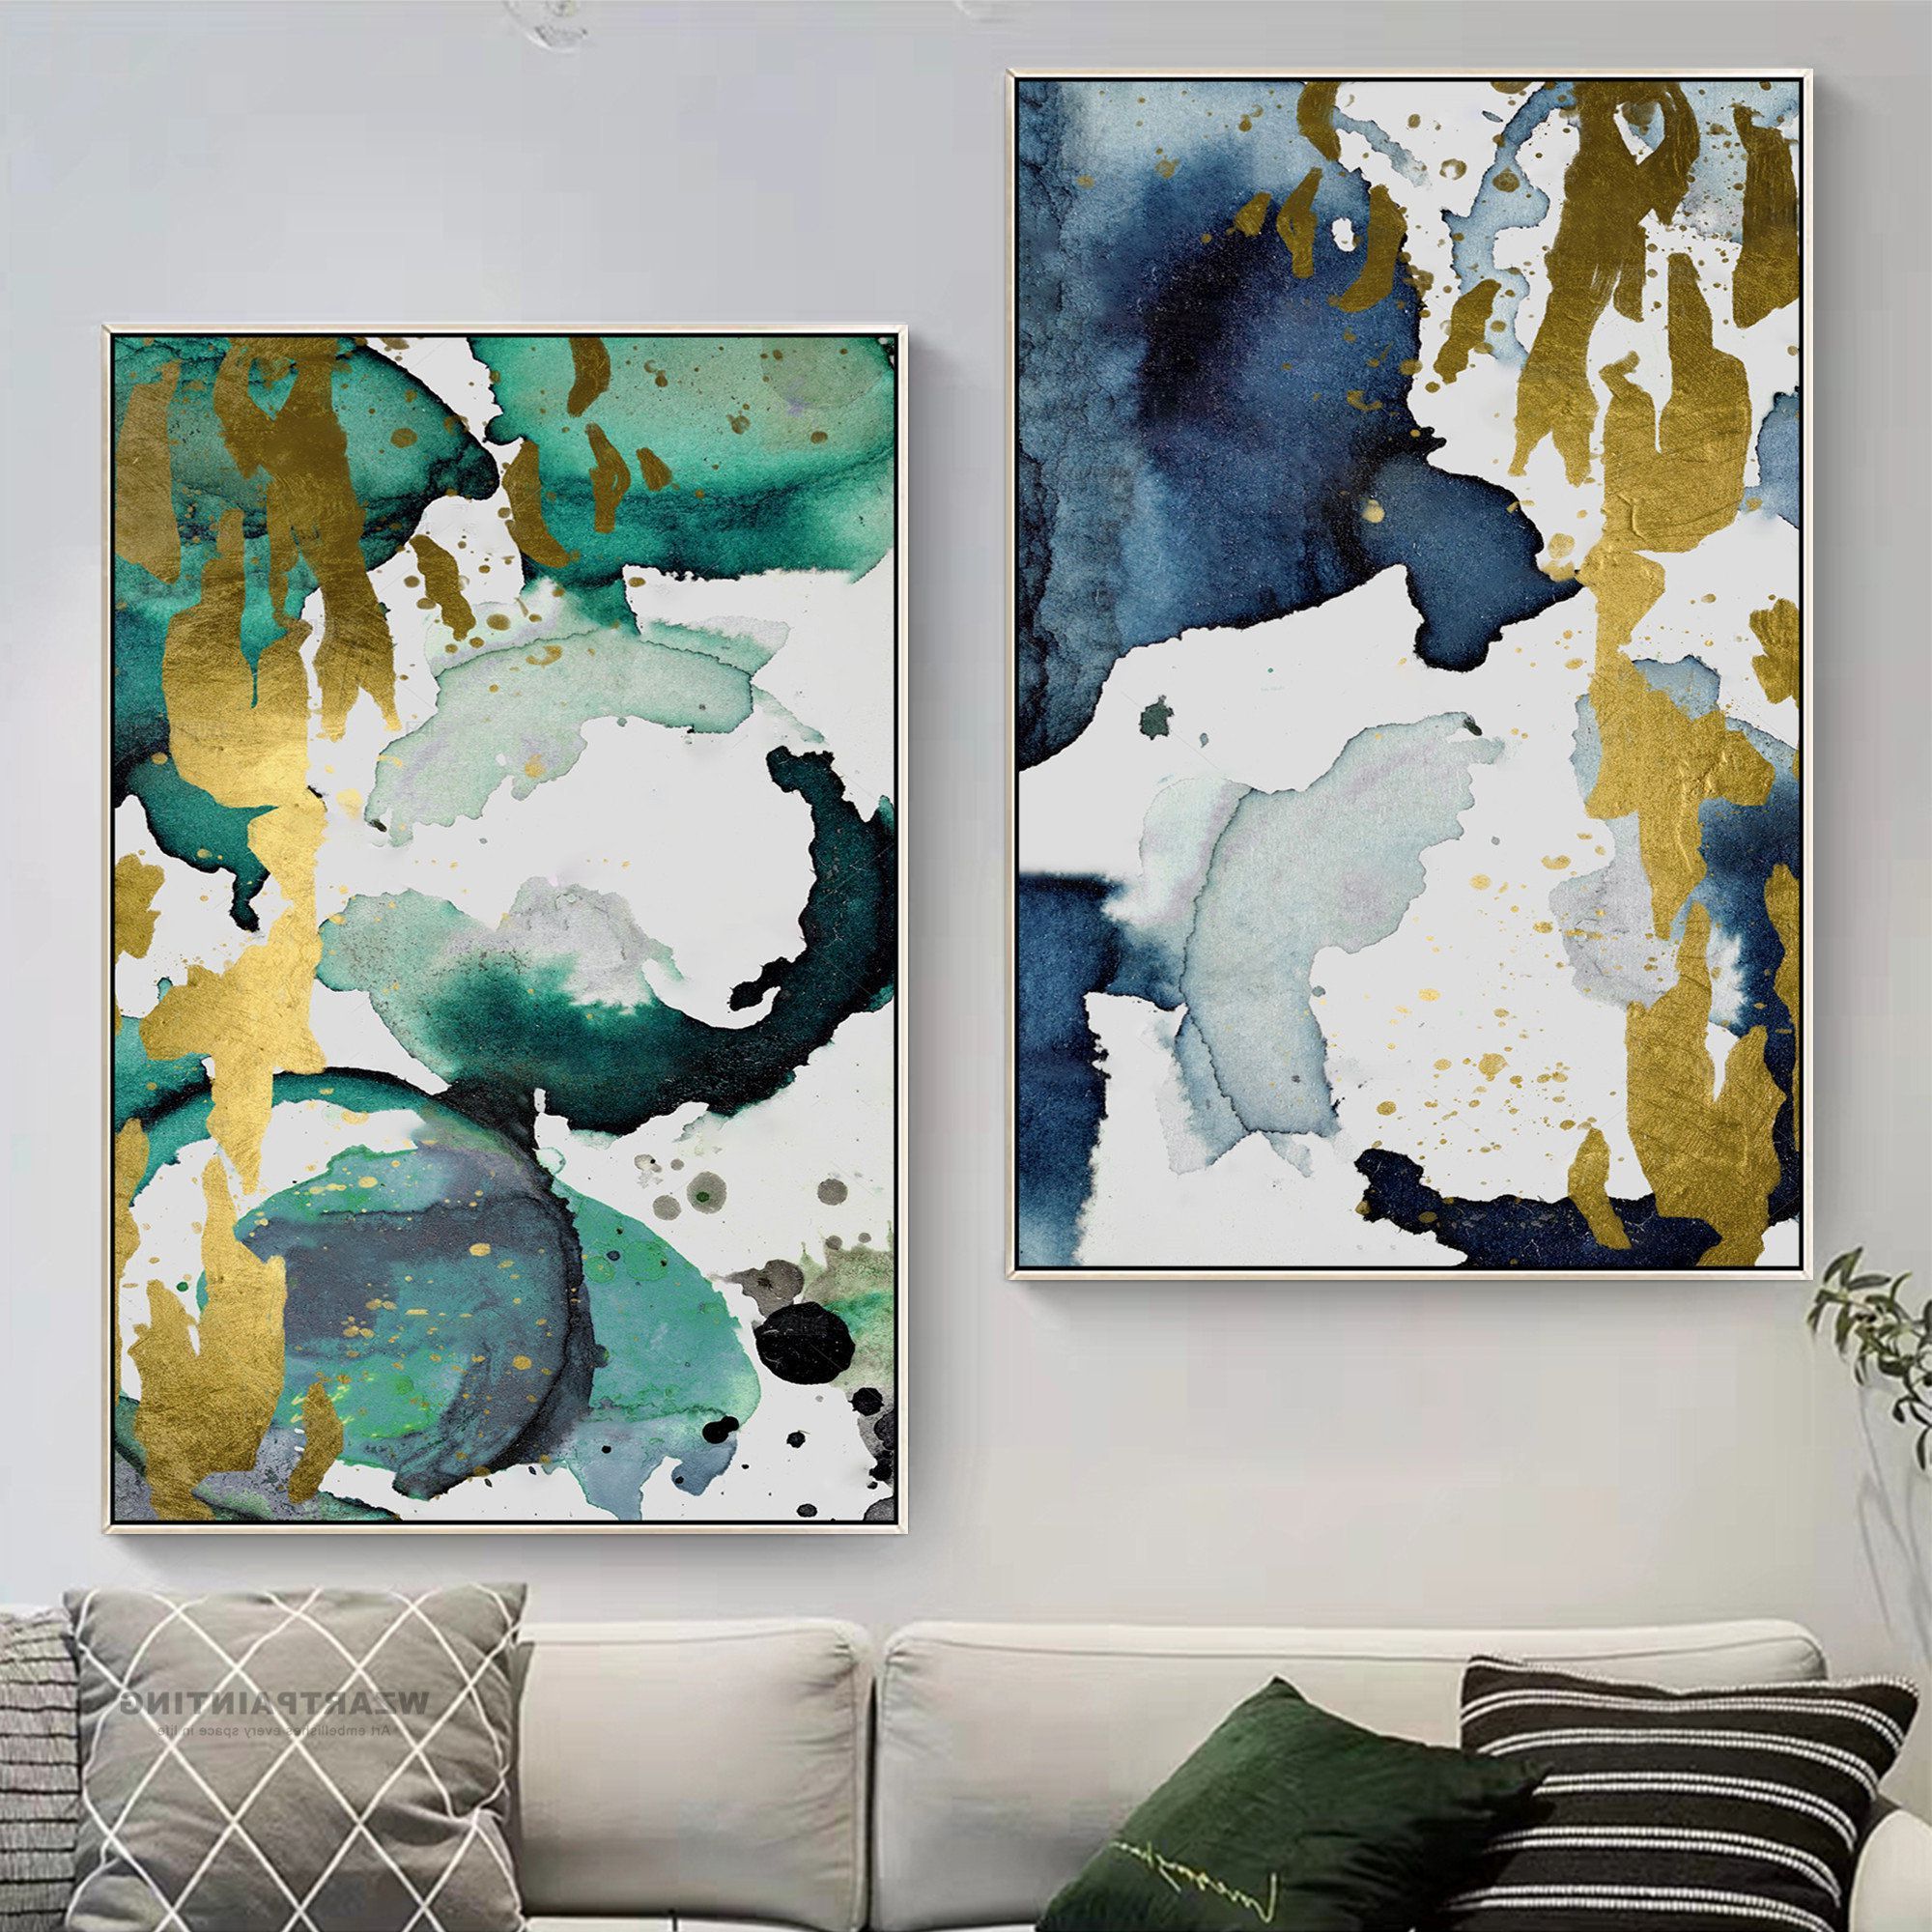 Modern Framed Art Prints Pertaining To Preferred Framed Wall Art Set Of 2 Prints Abstract Gold Green Navy (View 4 of 20)